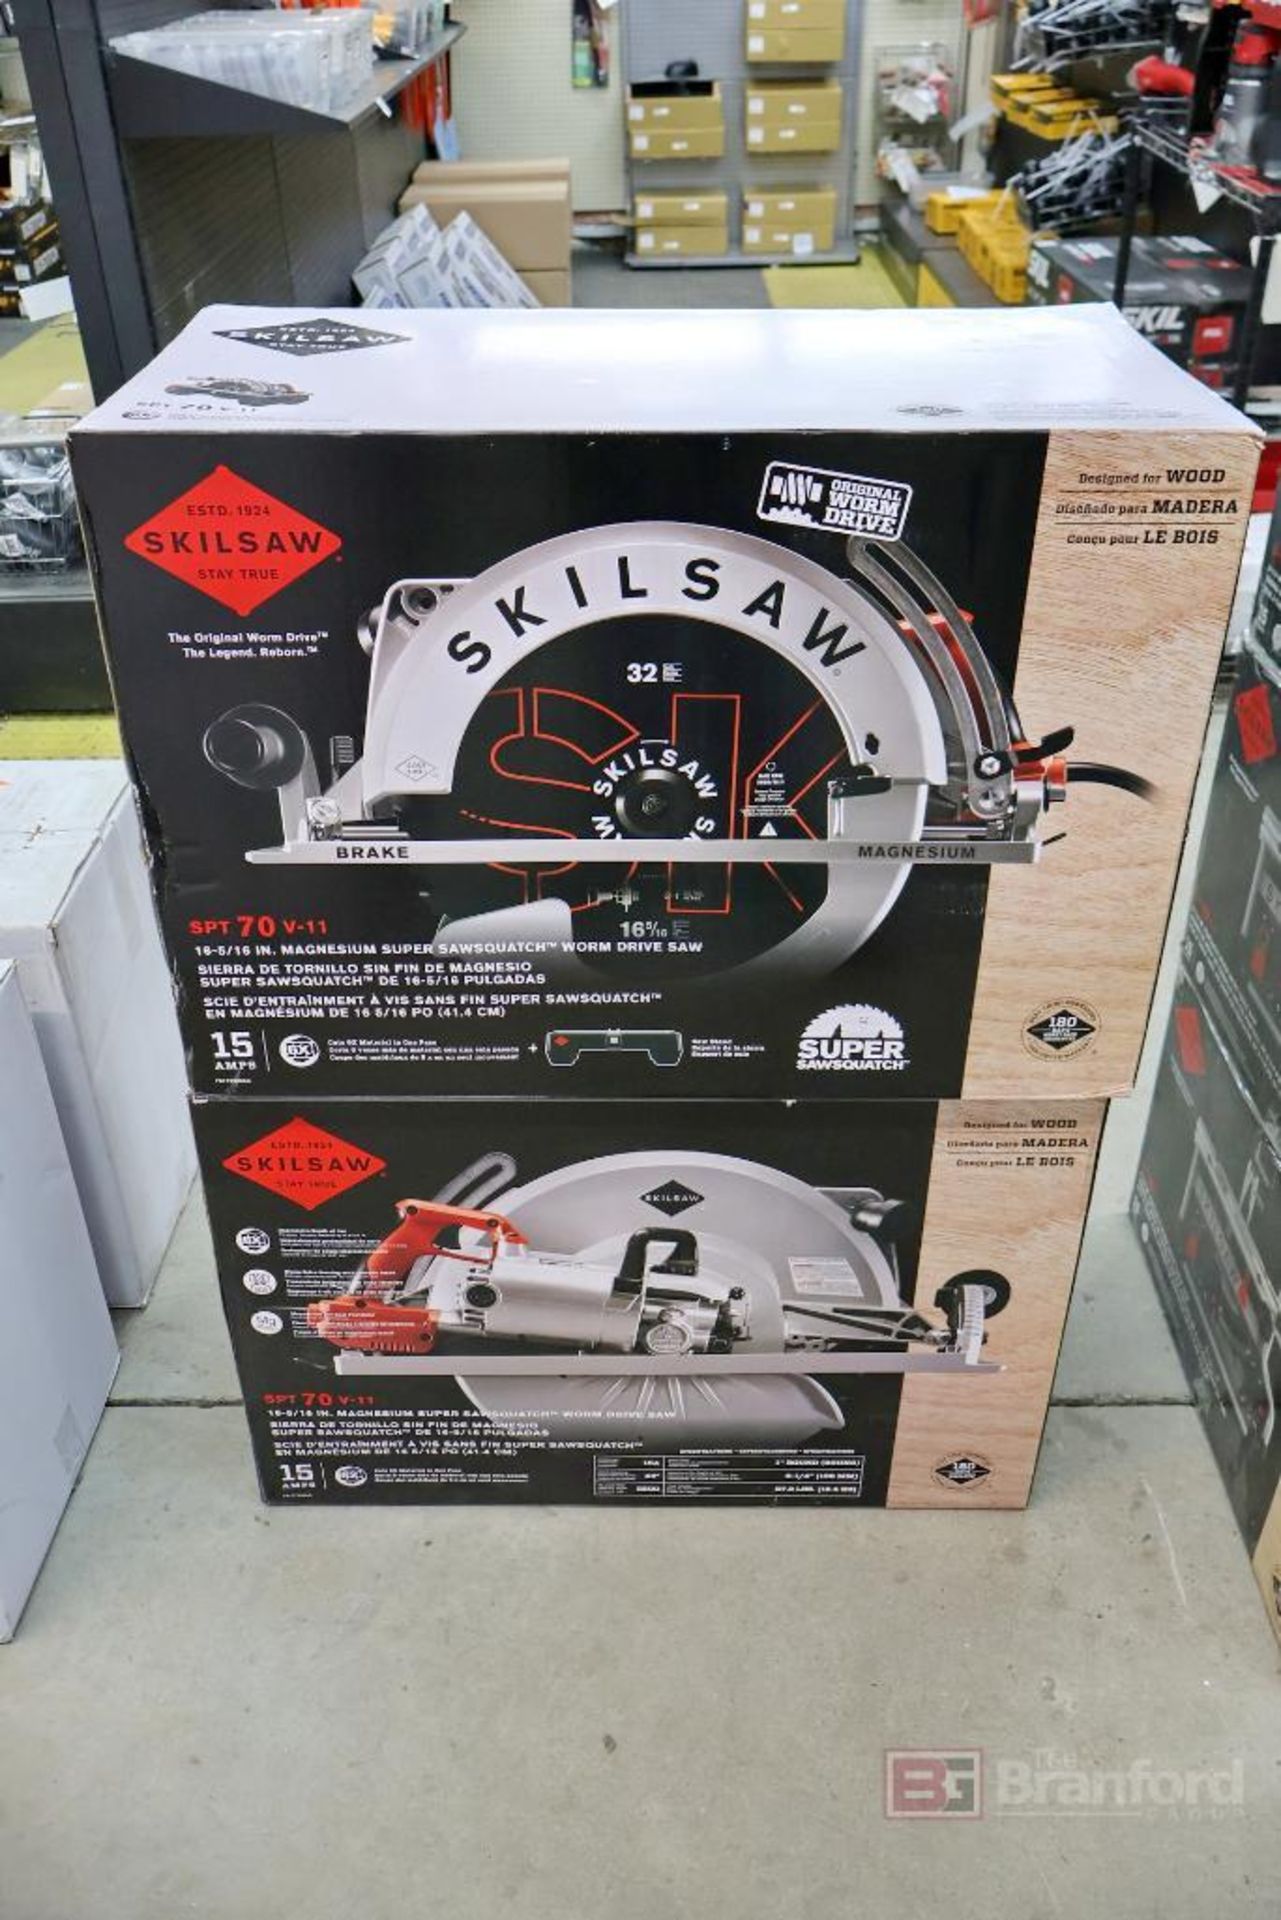 SKILSAW SPT 70 V-11 Magnesium Sawsquatch Worm Drive Saw - Image 6 of 11